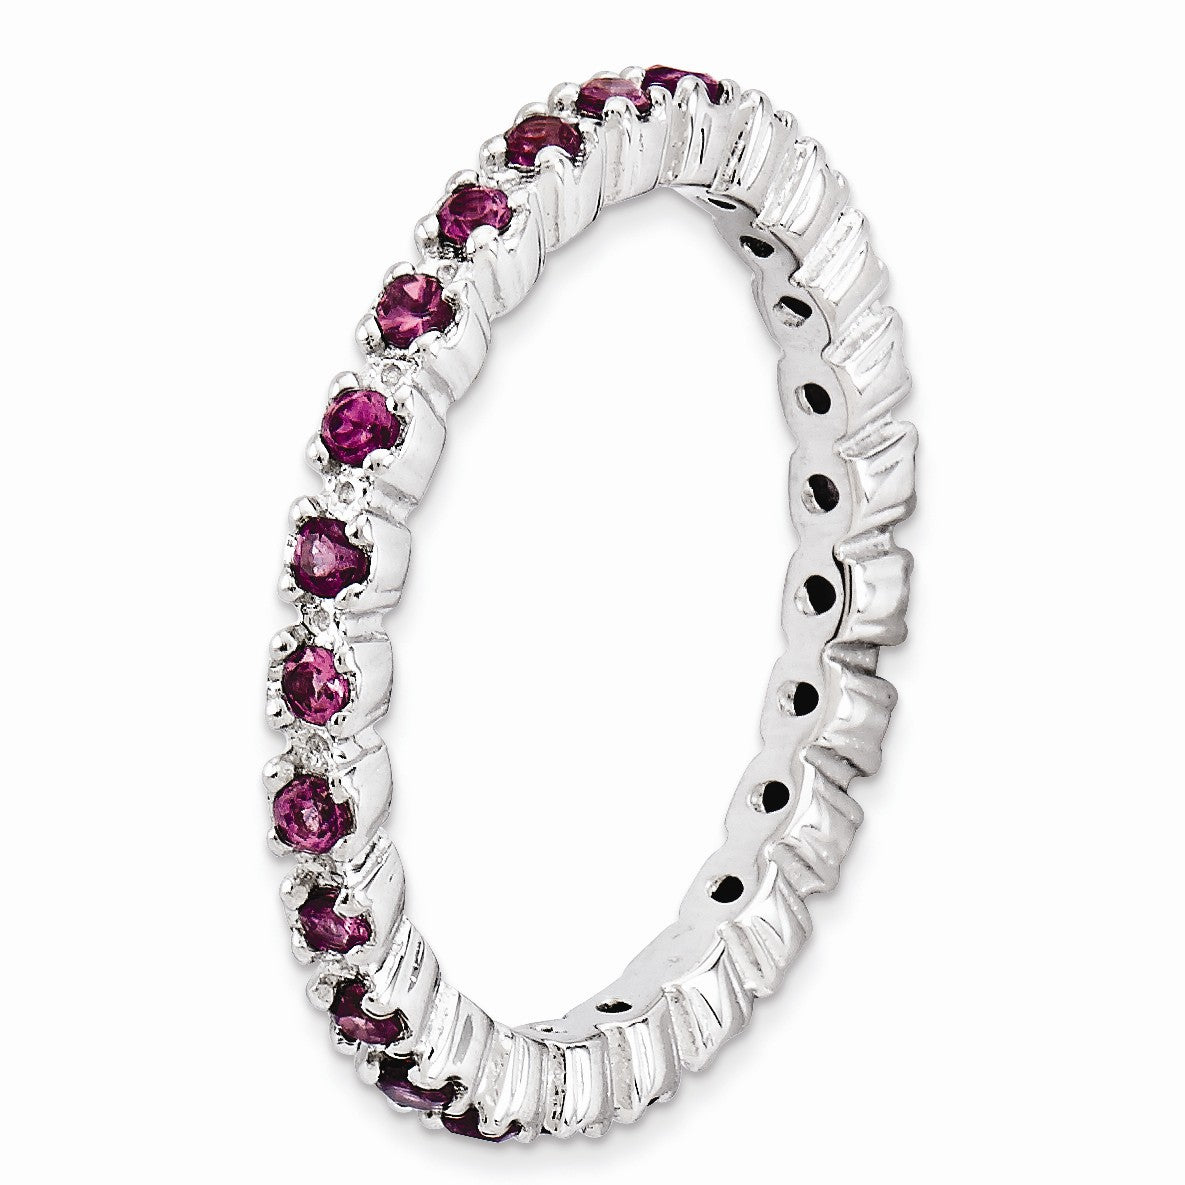 Alternate view of the Sterling Silver Stackable Rhodolite Garnet Band by The Black Bow Jewelry Co.